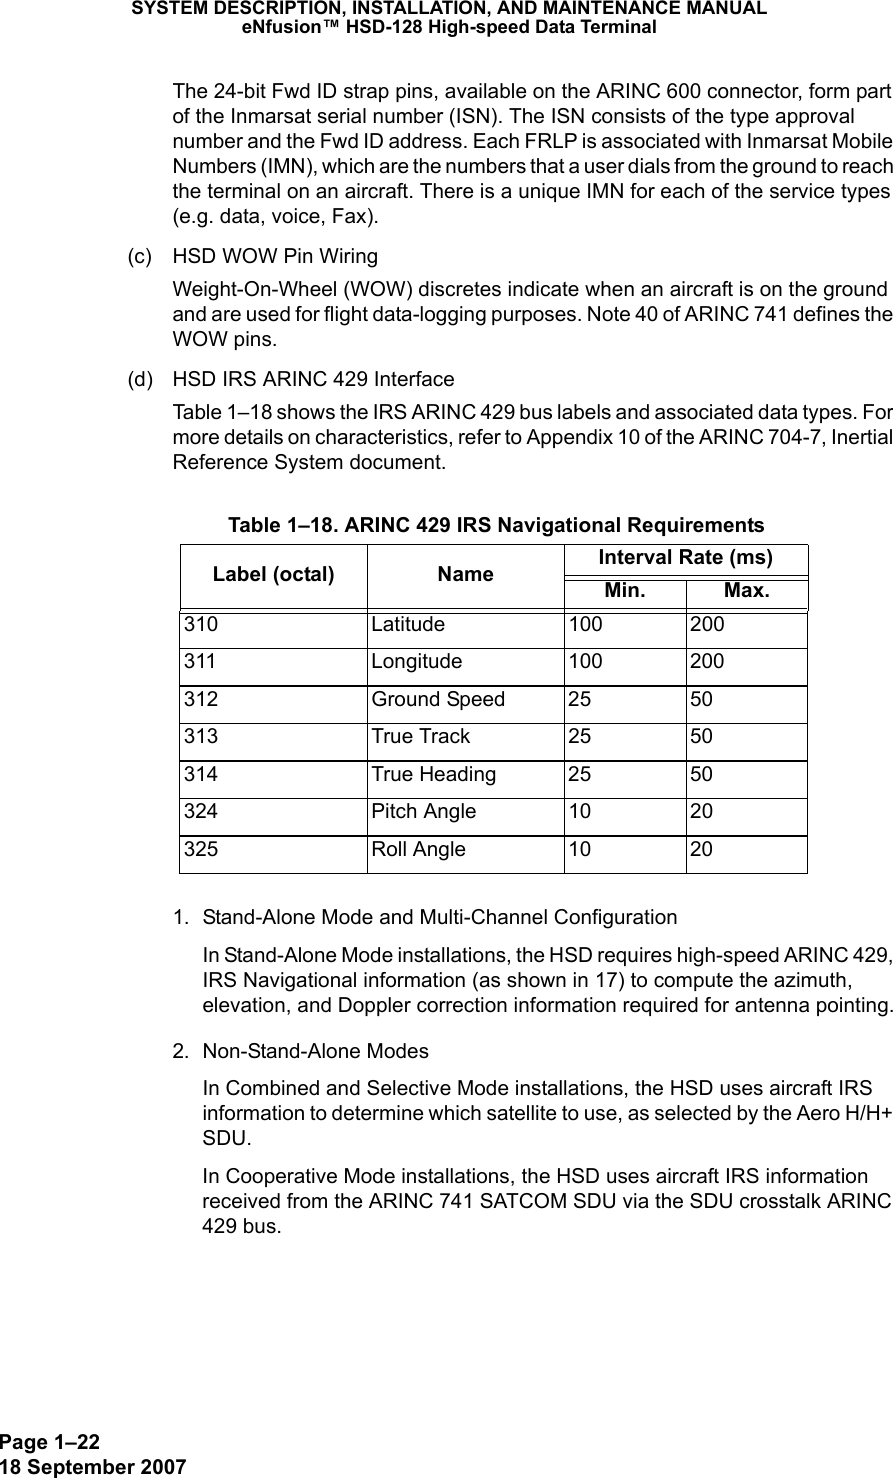 Page 1–2218 September 2007SYSTEM DESCRIPTION, INSTALLATION, AND MAINTENANCE MANUALeNfusion™ HSD-128 High-speed Data TerminalThe 24-bit Fwd ID strap pins, available on the ARINC 600 connector, form part of the Inmarsat serial number (ISN). The ISN consists of the type approval number and the Fwd ID address. Each FRLP is associated with Inmarsat Mobile Numbers (IMN), which are the numbers that a user dials from the ground to reach the terminal on an aircraft. There is a unique IMN for each of the service types (e.g. data, voice, Fax).(c) HSD WOW Pin WiringWeight-On-Wheel (WOW) discretes indicate when an aircraft is on the ground and are used for flight data-logging purposes. Note 40 of ARINC 741 defines the WOW pins.(d) HSD IRS ARINC 429 InterfaceTable 1–18 shows the IRS ARINC 429 bus labels and associated data types. For more details on characteristics, refer to Appendix 10 of the ARINC 704-7, Inertial Reference System document.1. Stand-Alone Mode and Multi-Channel ConfigurationIn Stand-Alone Mode installations, the HSD requires high-speed ARINC 429, IRS Navigational information (as shown in 17) to compute the azimuth, elevation, and Doppler correction information required for antenna pointing.2. Non-Stand-Alone ModesIn Combined and Selective Mode installations, the HSD uses aircraft IRS information to determine which satellite to use, as selected by the Aero H/H+ SDU.In Cooperative Mode installations, the HSD uses aircraft IRS information received from the ARINC 741 SATCOM SDU via the SDU crosstalk ARINC 429 bus. Table 1–18. ARINC 429 IRS Navigational RequirementsLabel (octal) Name Interval Rate (ms)Min. Max.310 Latitude 100 200311 Longitude 100 200312 Ground Speed 25 50313 True Track  25 50314 True Heading 25 50324 Pitch Angle 10 20325 Roll Angle 10 20